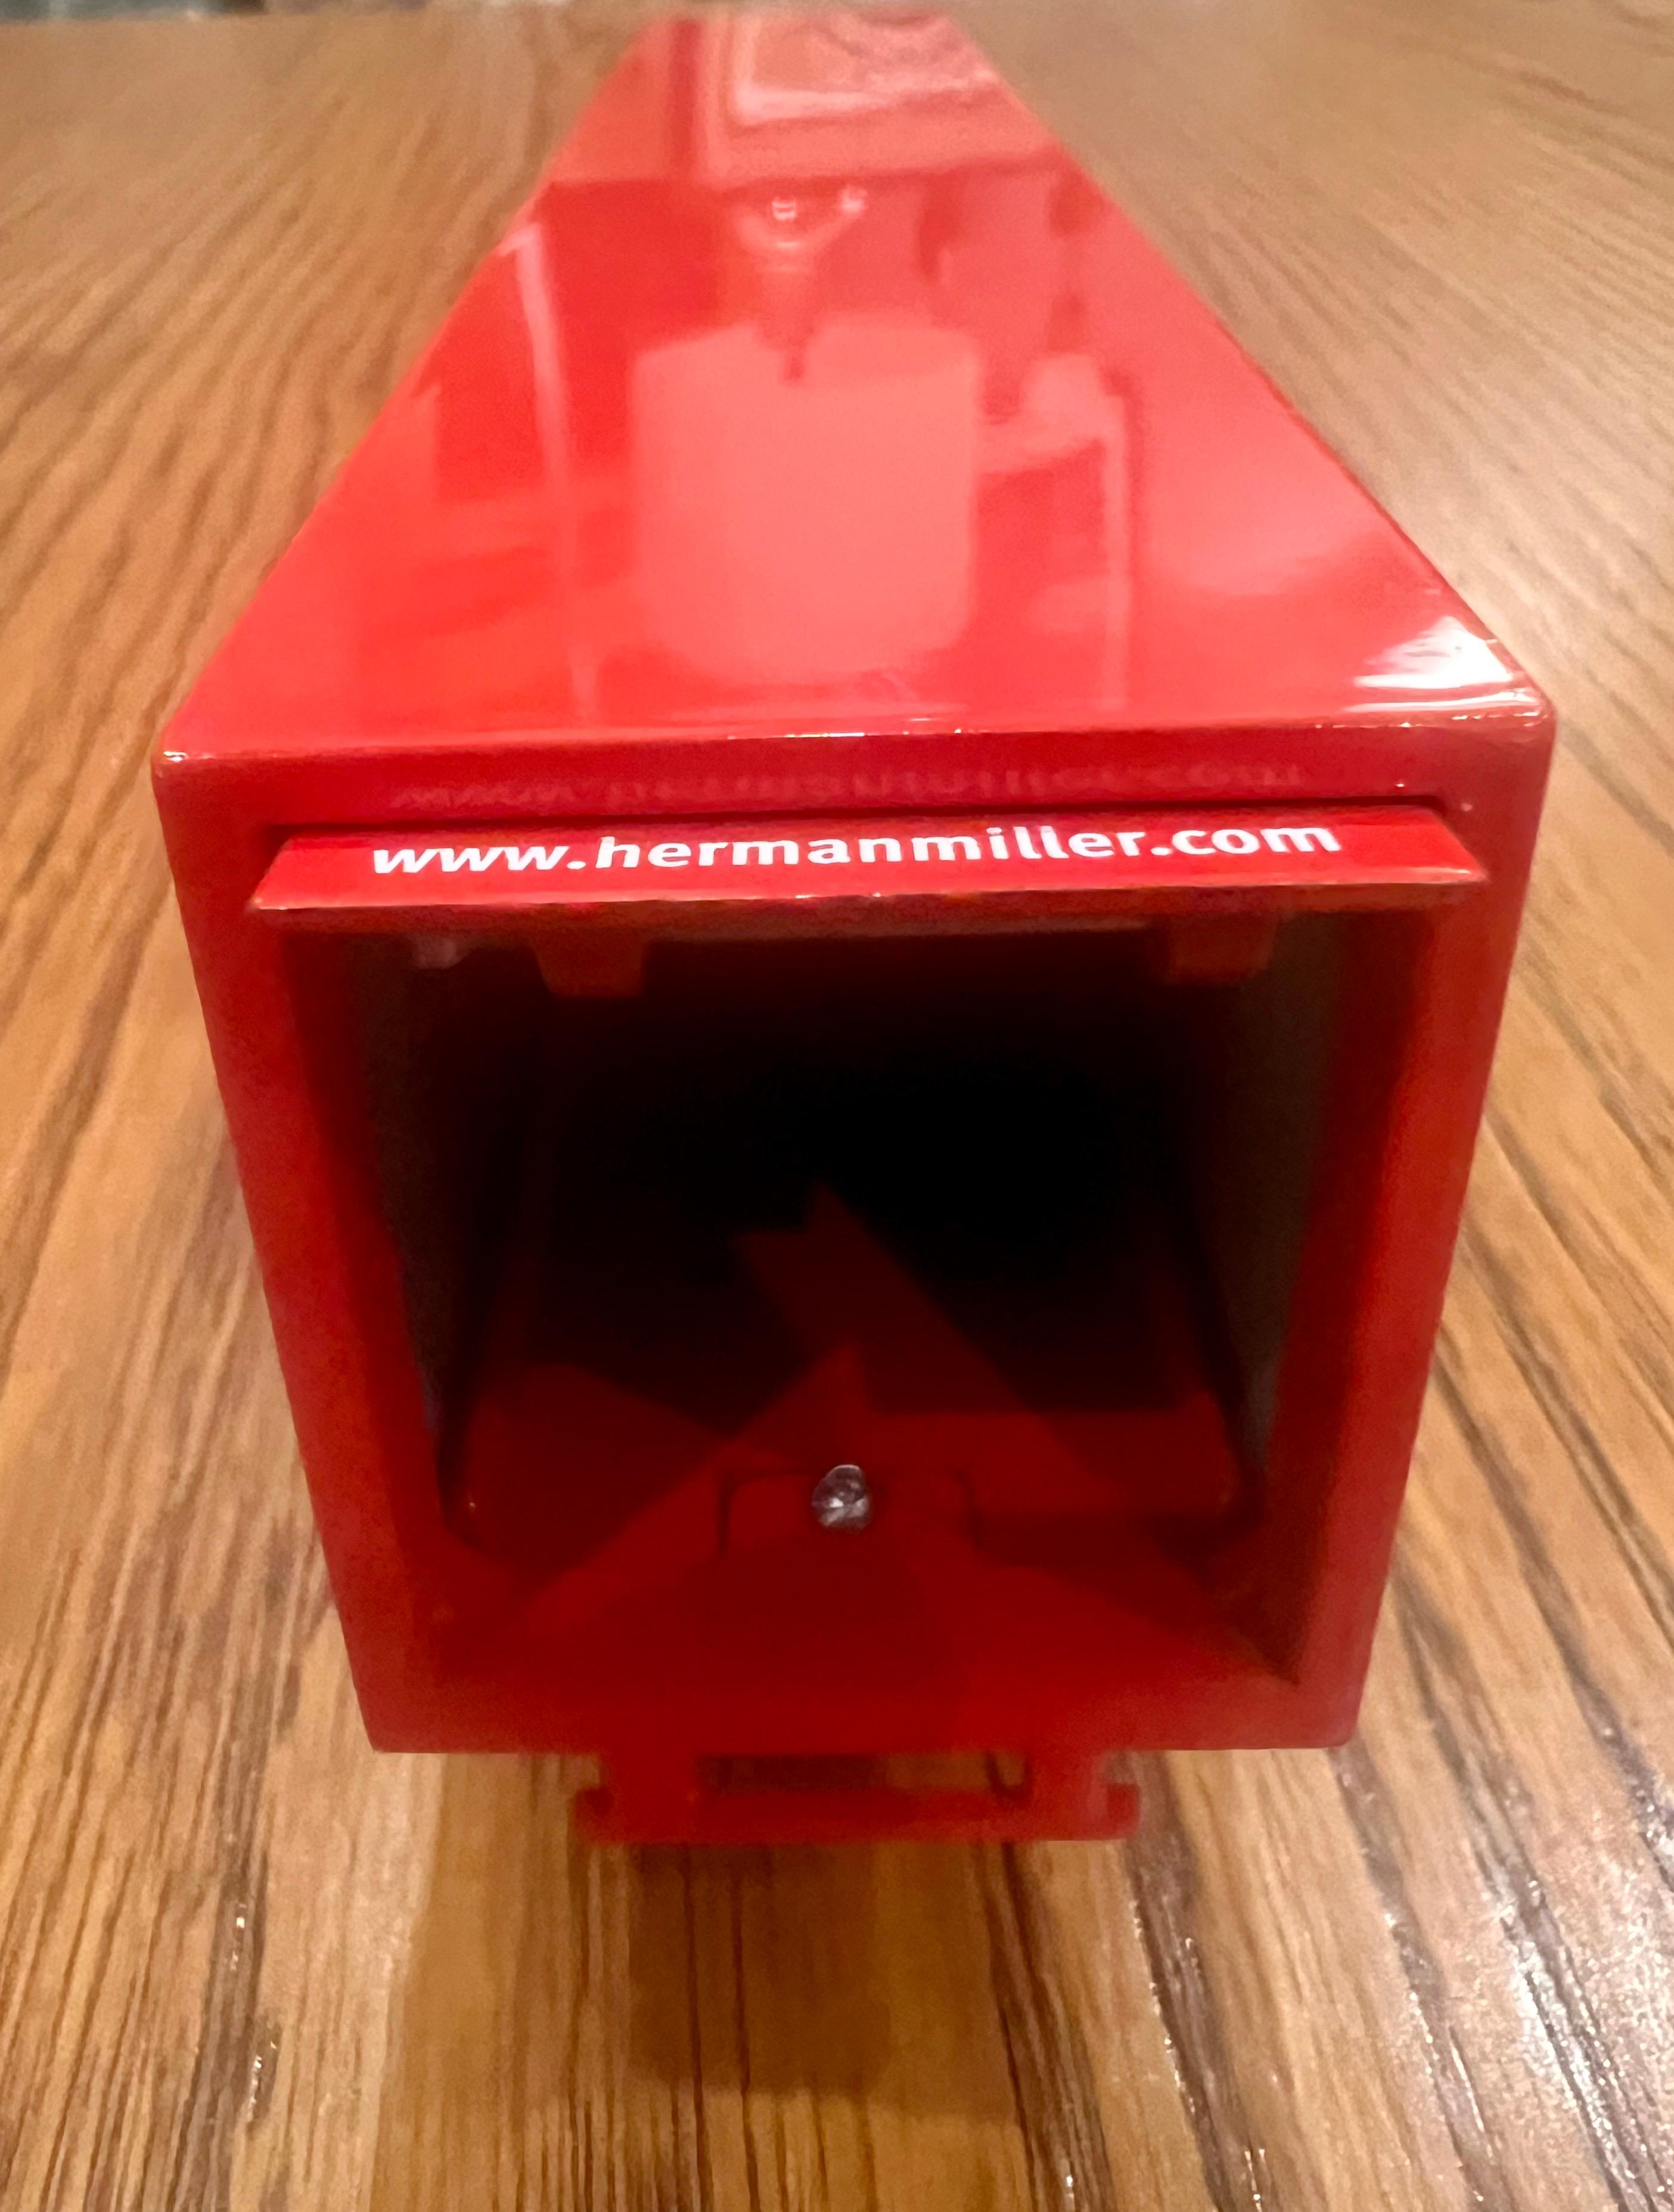 1980's Collectible Herman Miller Work Play Truck Original Box by Winbross USA In Excellent Condition For Sale In San Diego, CA